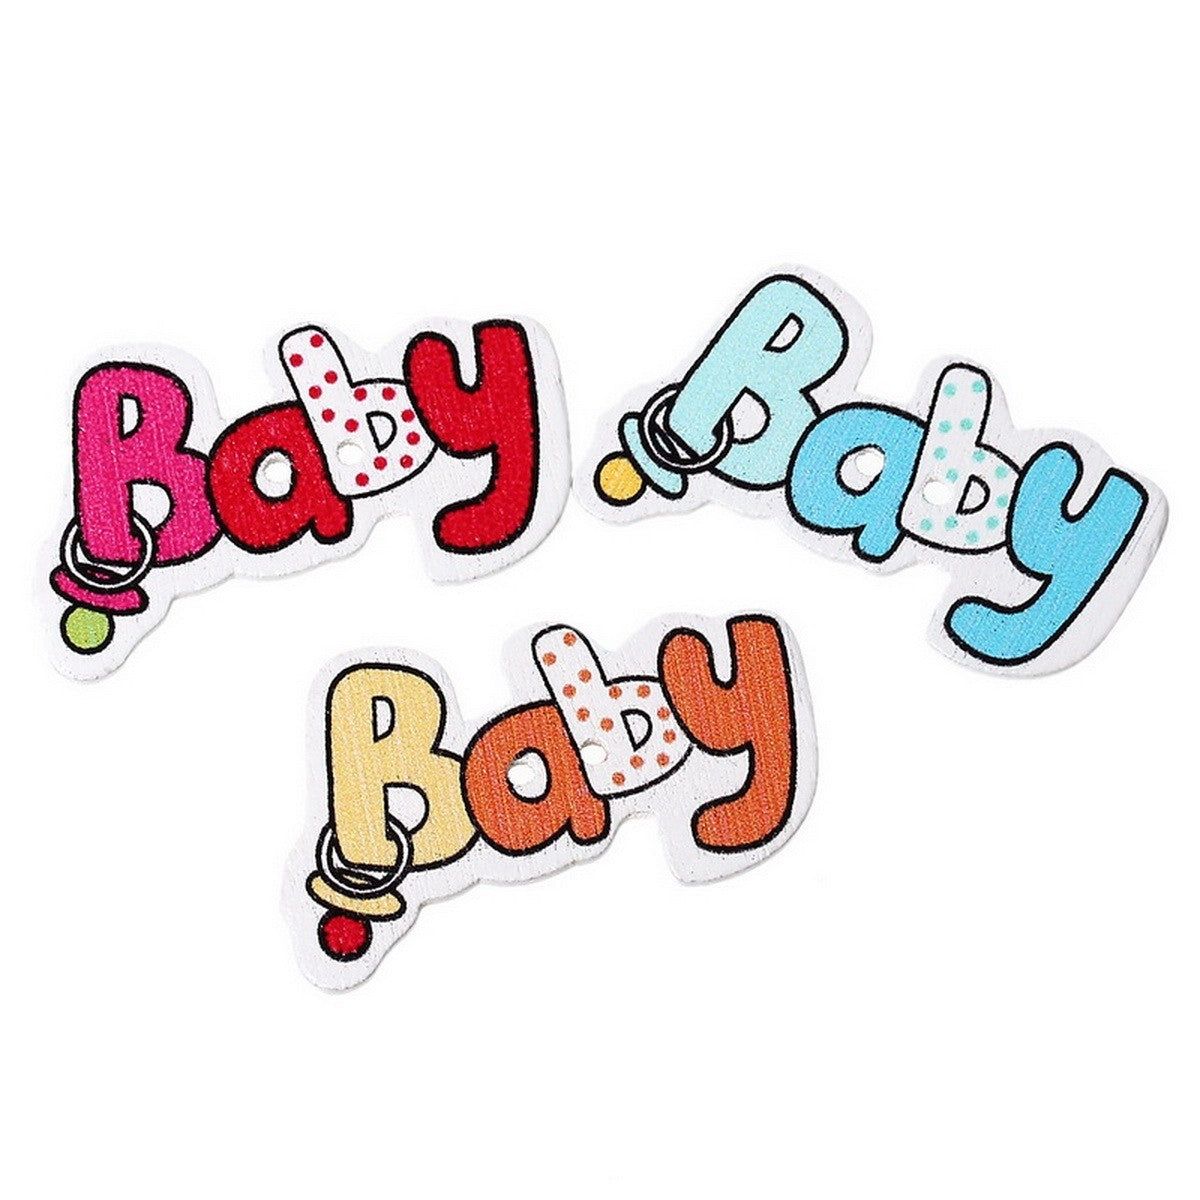 Wood Baby Words Buttons 5pcs BUT-084 Butang (Clearance)